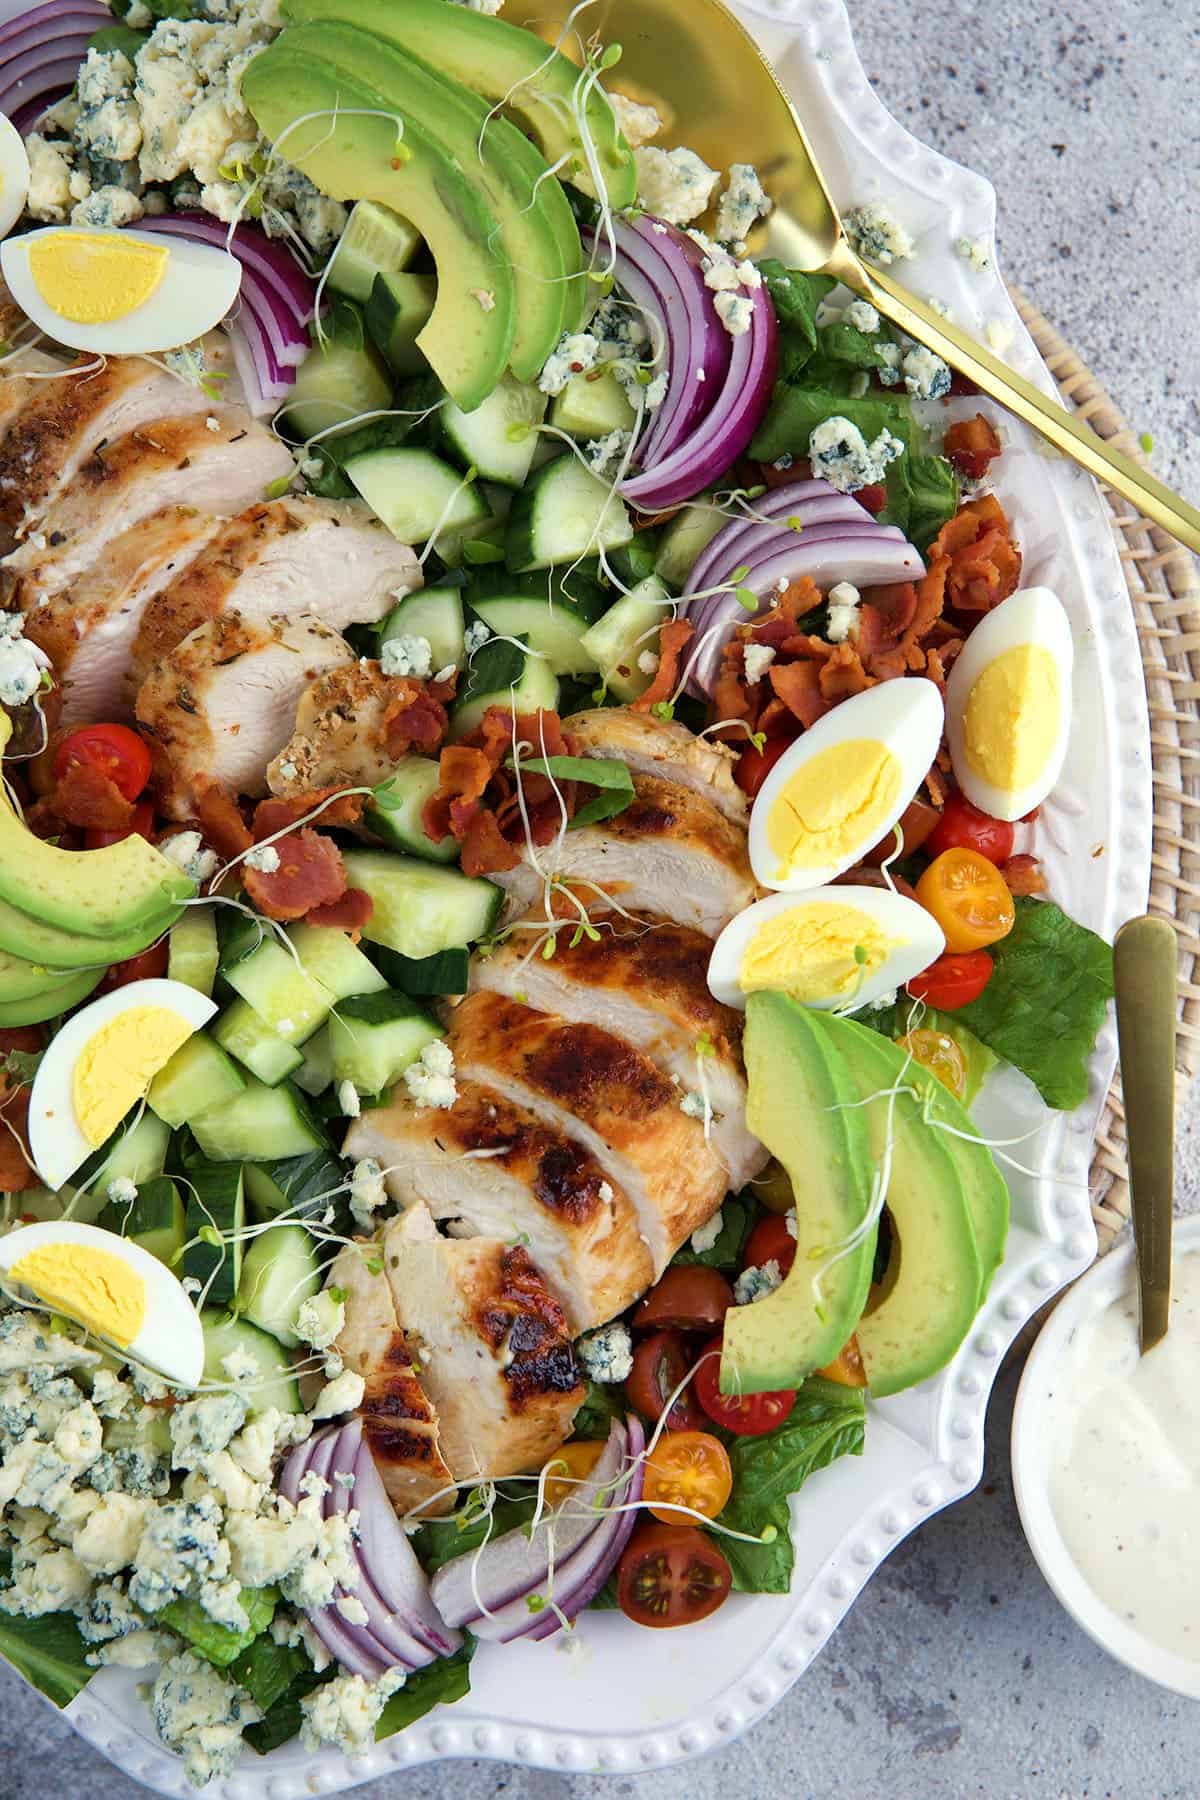 Eggs, avocado, chicken and more garnished a bed of greens.